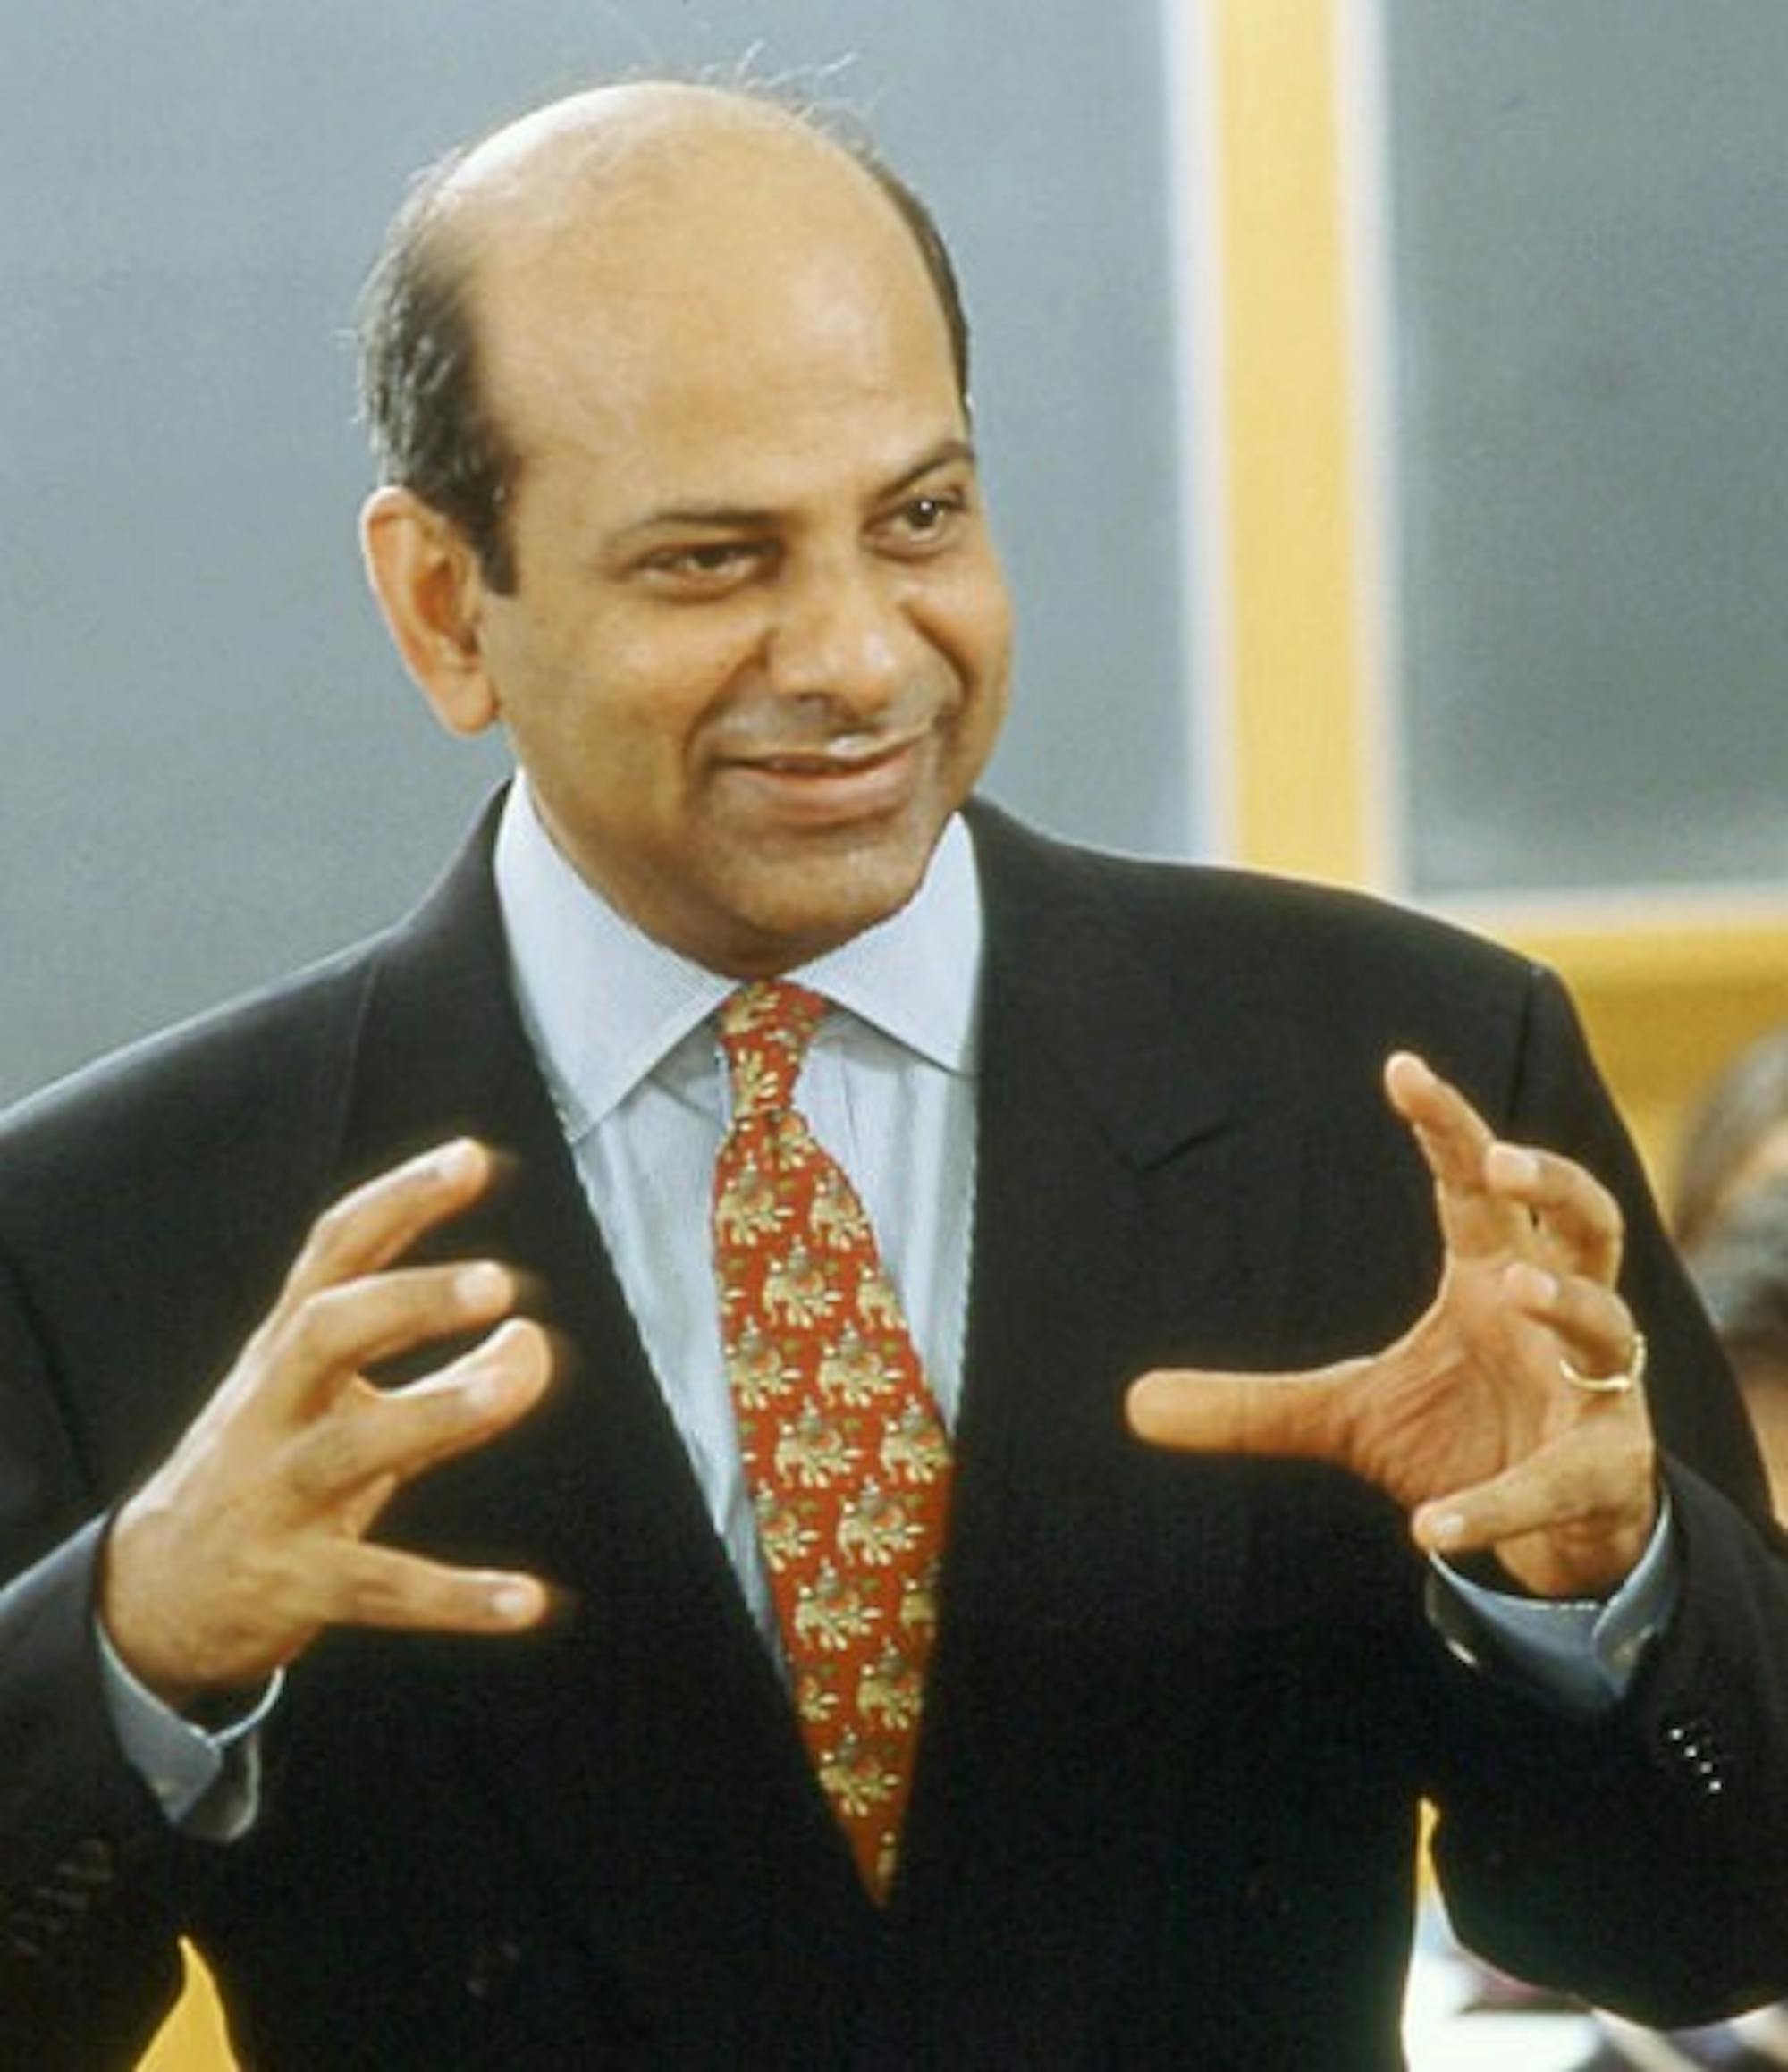 Professor Vijay Govindarajan, seen here, was one of the two Tuck School of Business professors named to The Times' 2007 Thinkers 50 list.